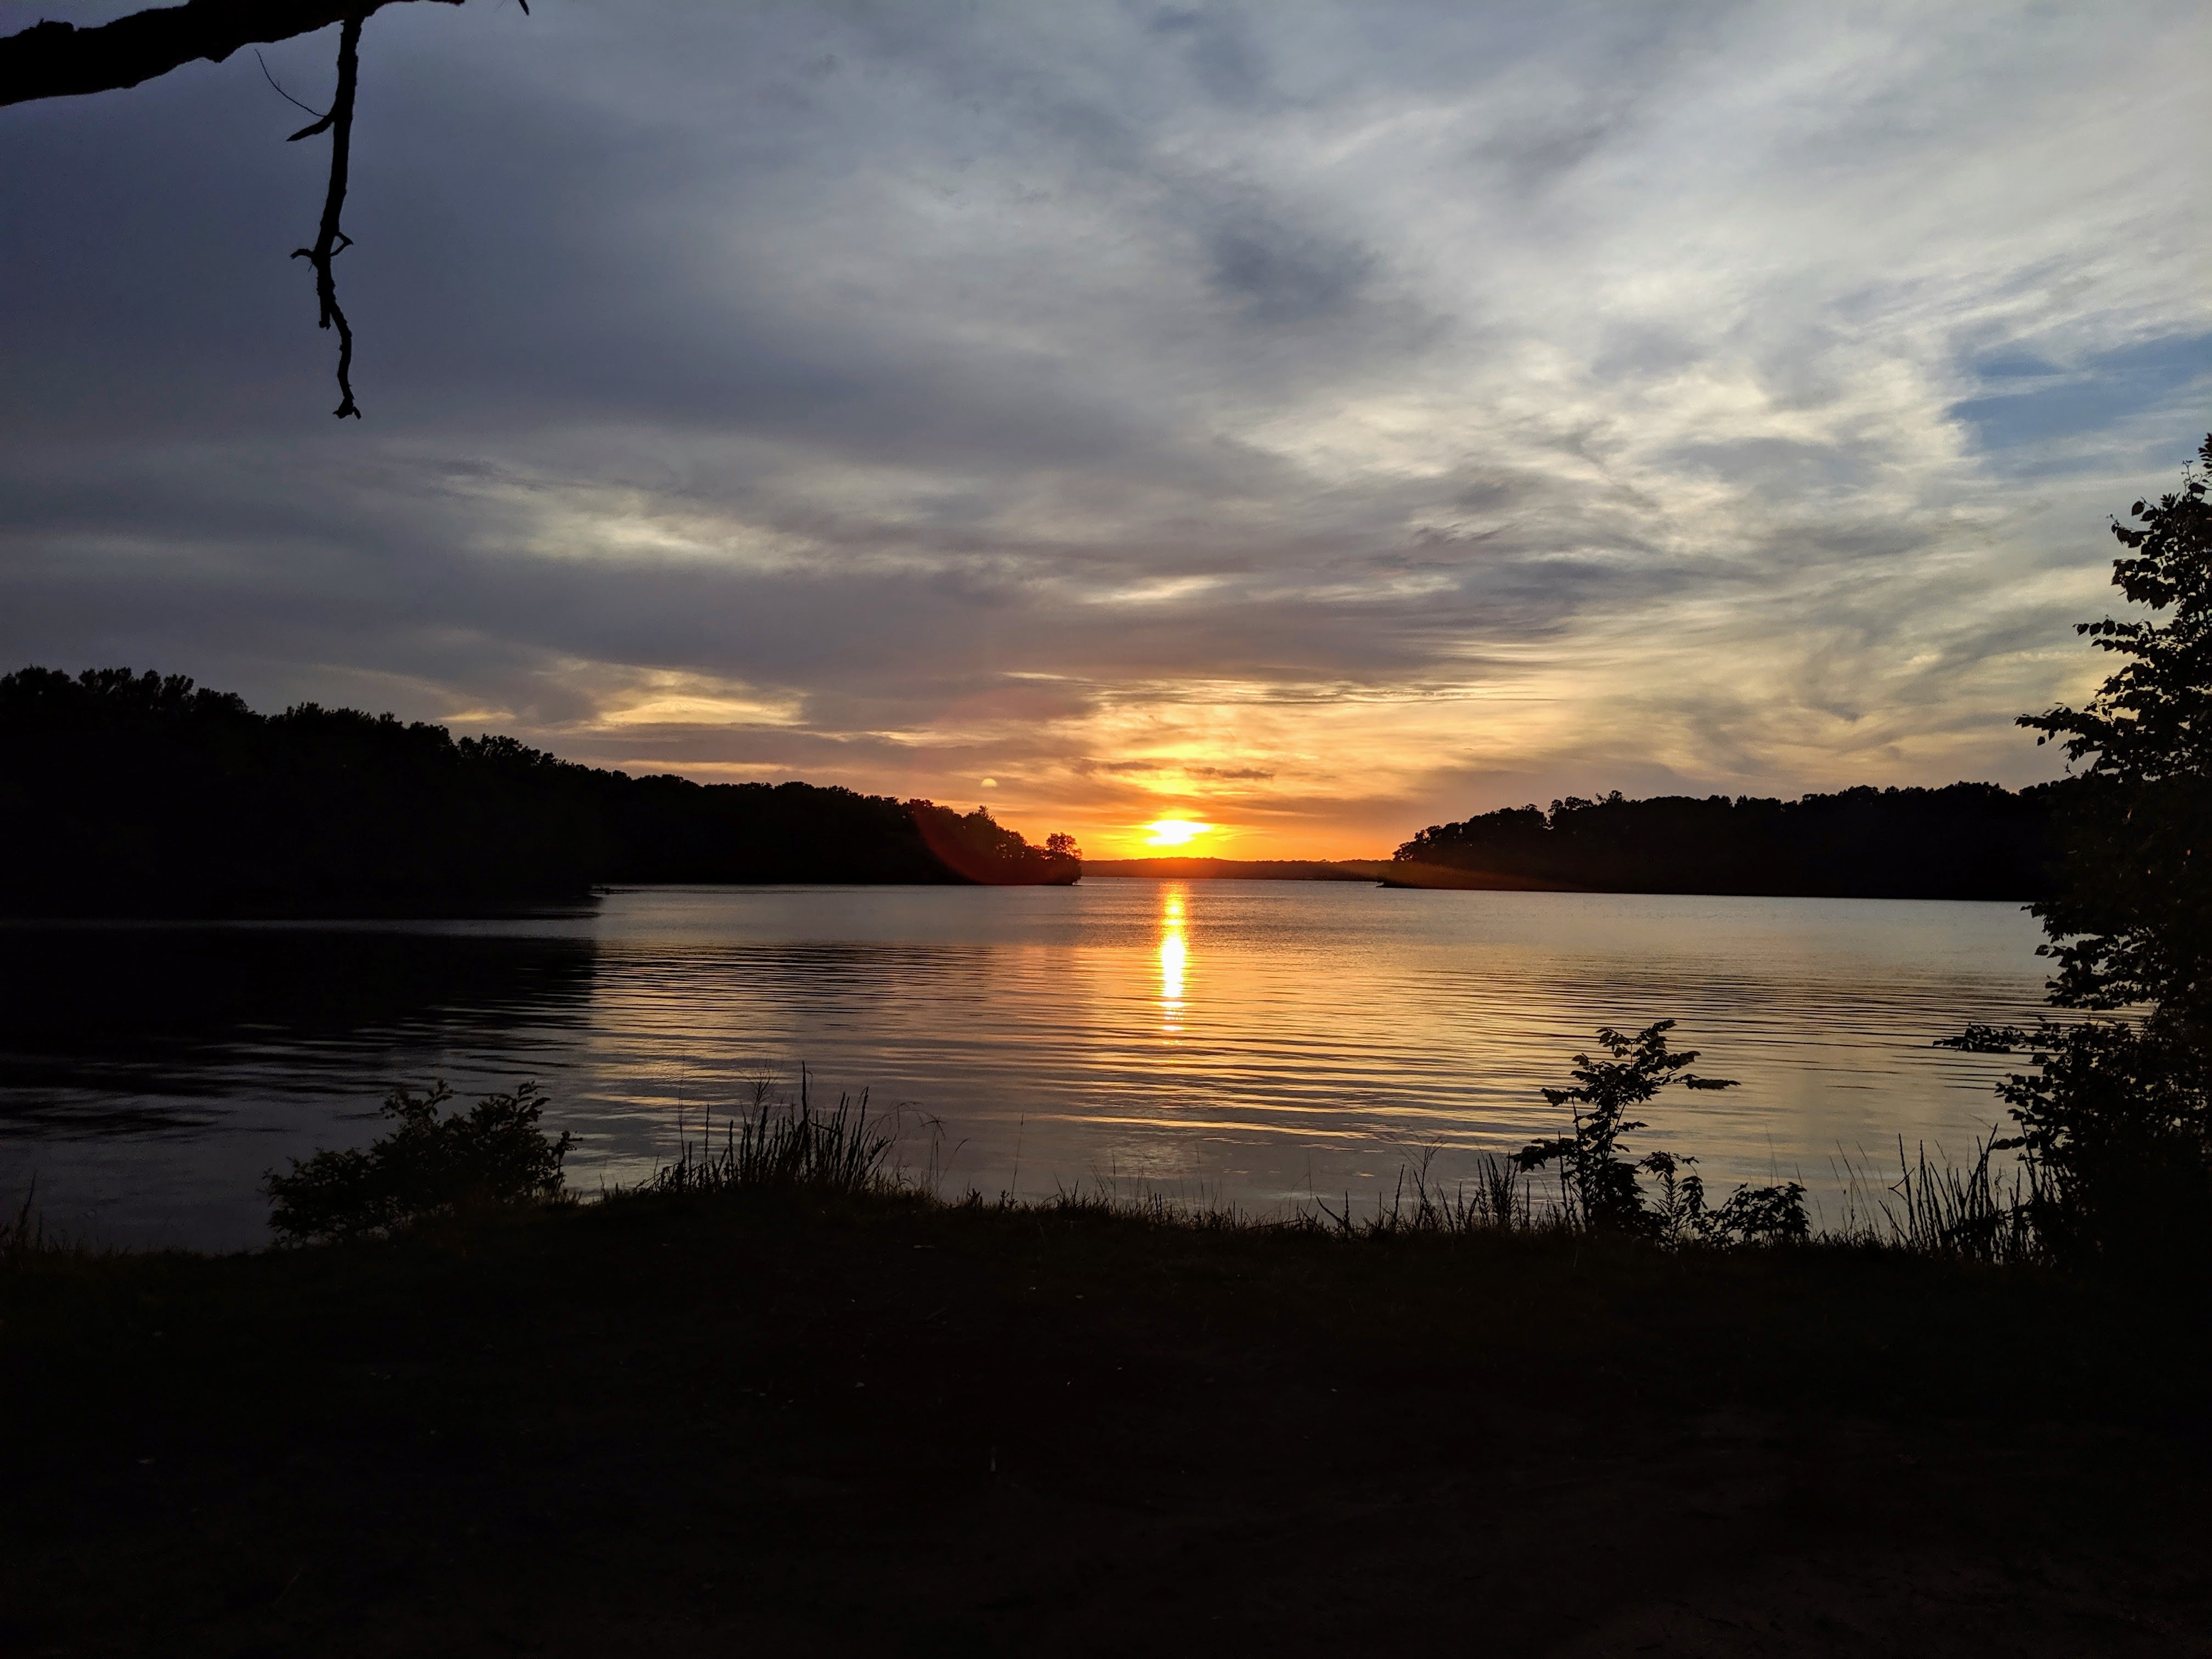 Sunset from site on Kentucky Lake